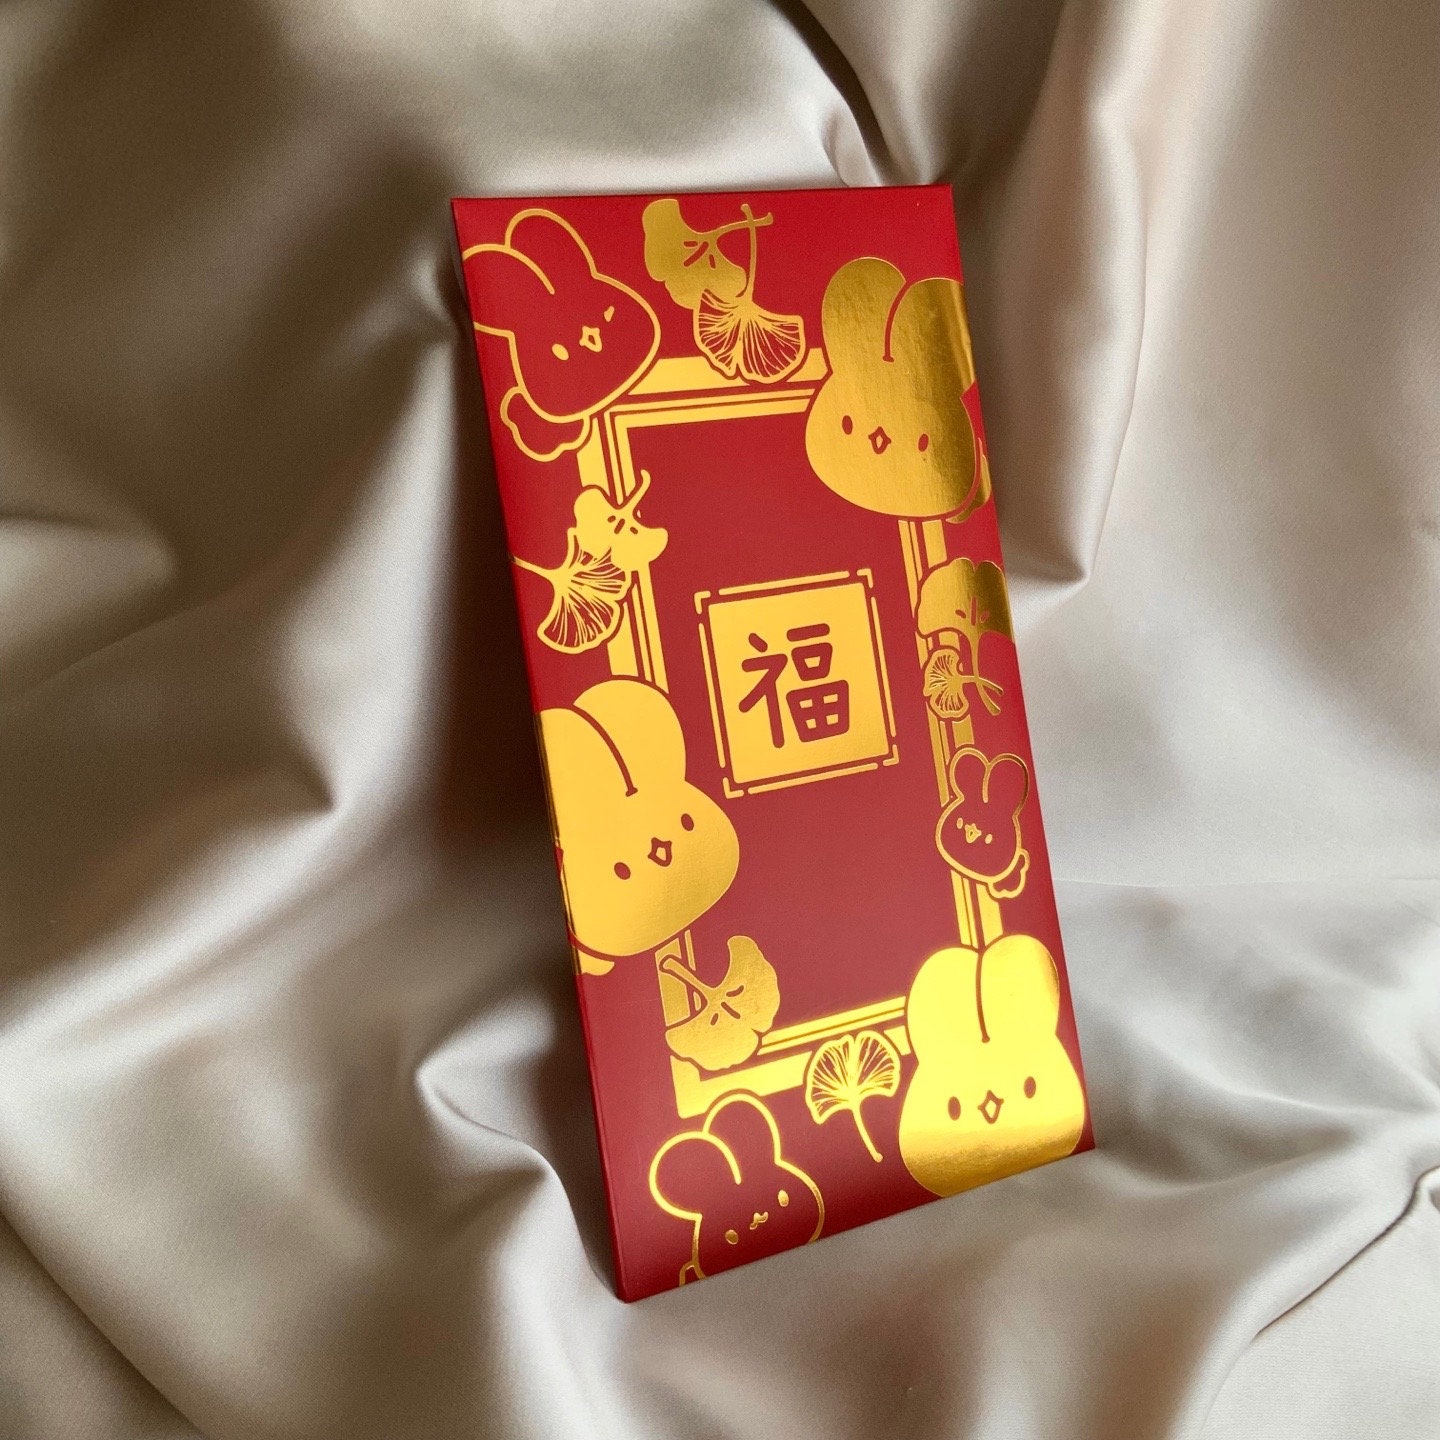 LOUIS VUITTON LV 2019 LUNAR NEW YEAR OF PIG RED POCKETS ENVELOPES